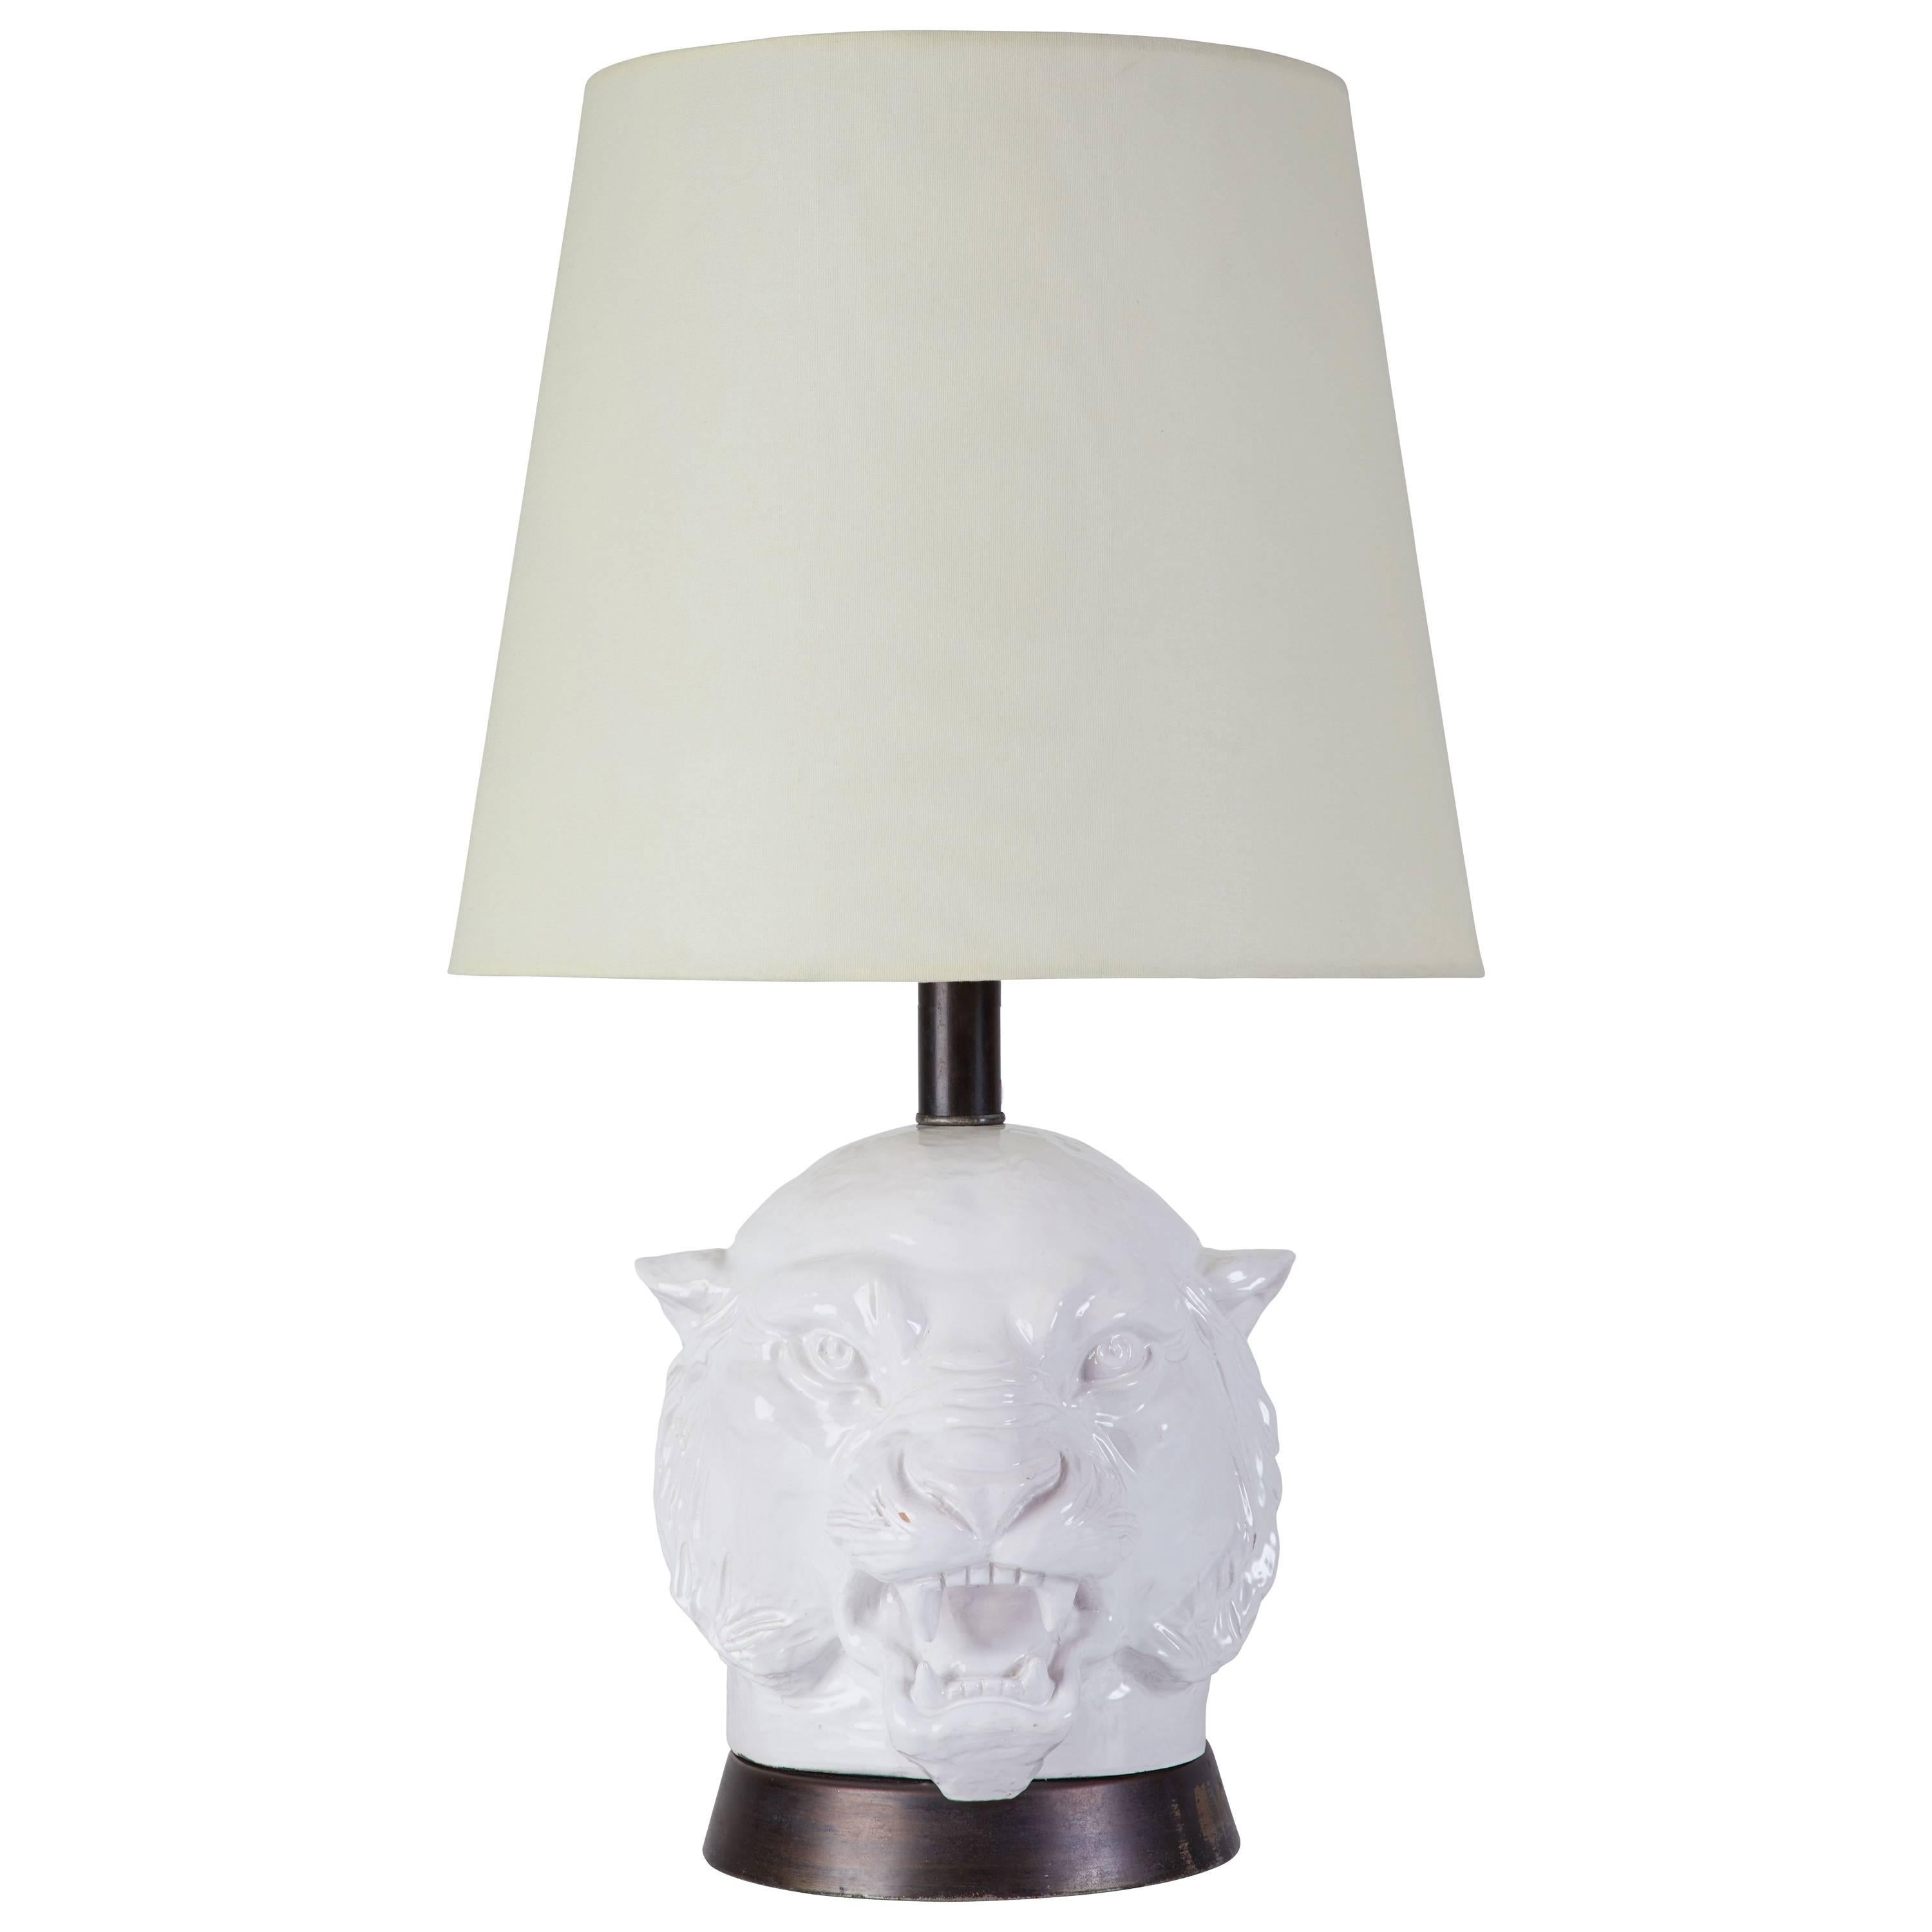 Ceramic slip cast tiger head table lamp with custom silk shade and metal base. Designed in the Italy, circa 1960s. Marked Italy to base. Rewired with French twist silk cord, original on/off switch. Takes one 100w maximum E26 light bulb. Height of